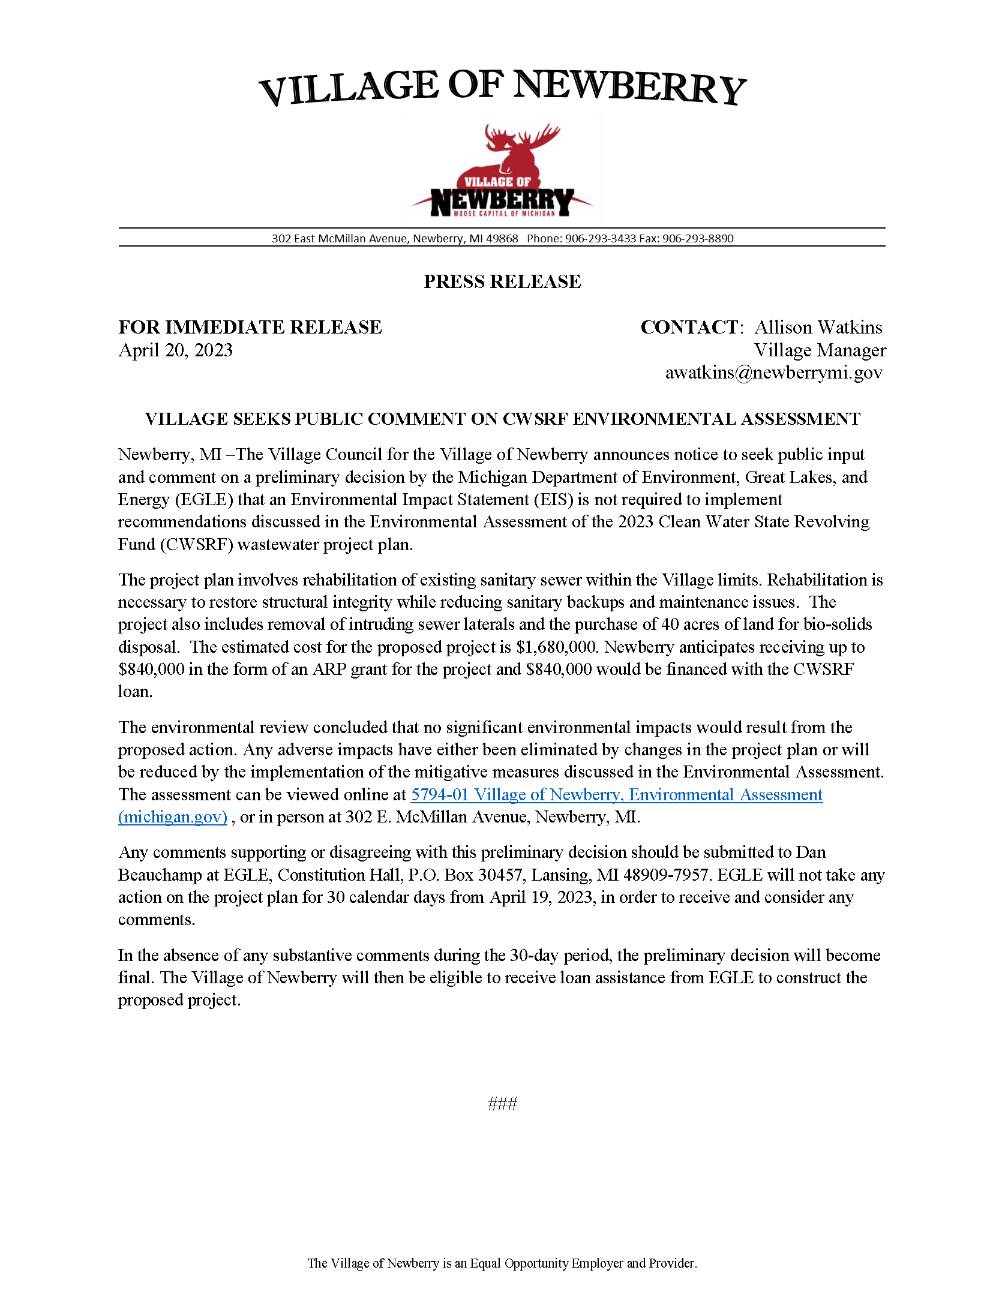 Press Release - Notice of Public Comment - FNSI Village of Newberry - Copy (2)